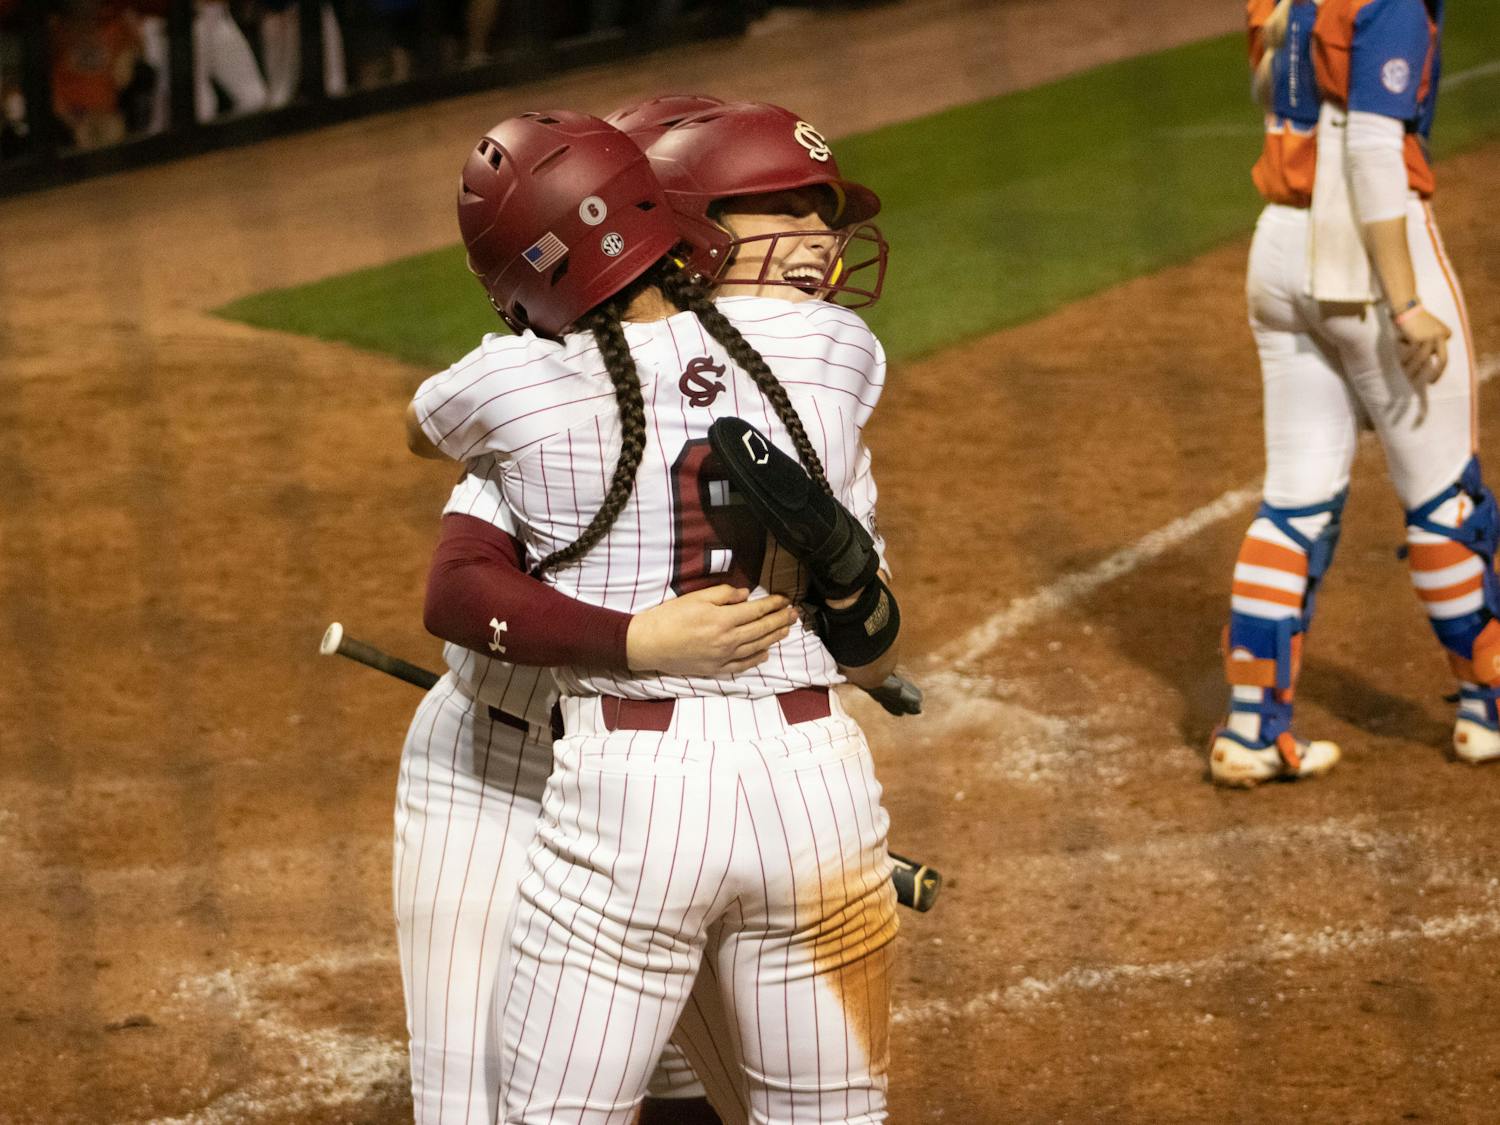 Fifth-year infielder Jordan Fabian hugs sophomore infielder Emma Sellers after scoring in their game against Florida on March 31, 2023, at Beckham Field. The Gamecocks beat the Gators 13-10, winning the first game in the series.